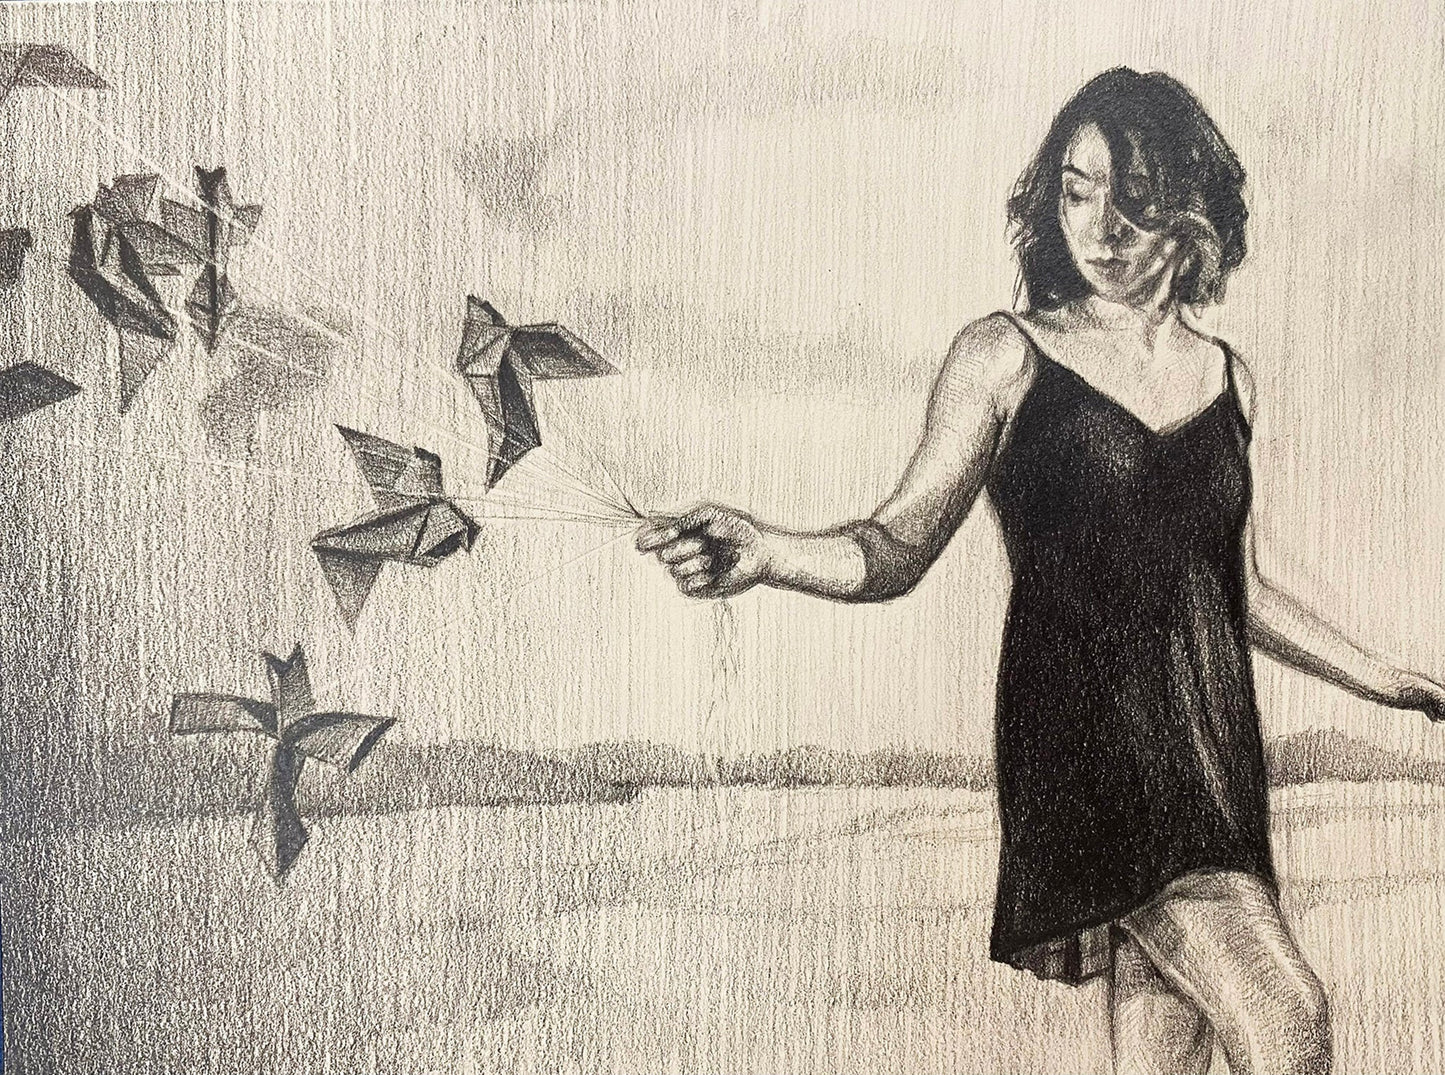 Graphite drawing of woman with paper cranes on strings. 6"x8" (12.25"x15.25" framed) graphite on paper by April Dawes